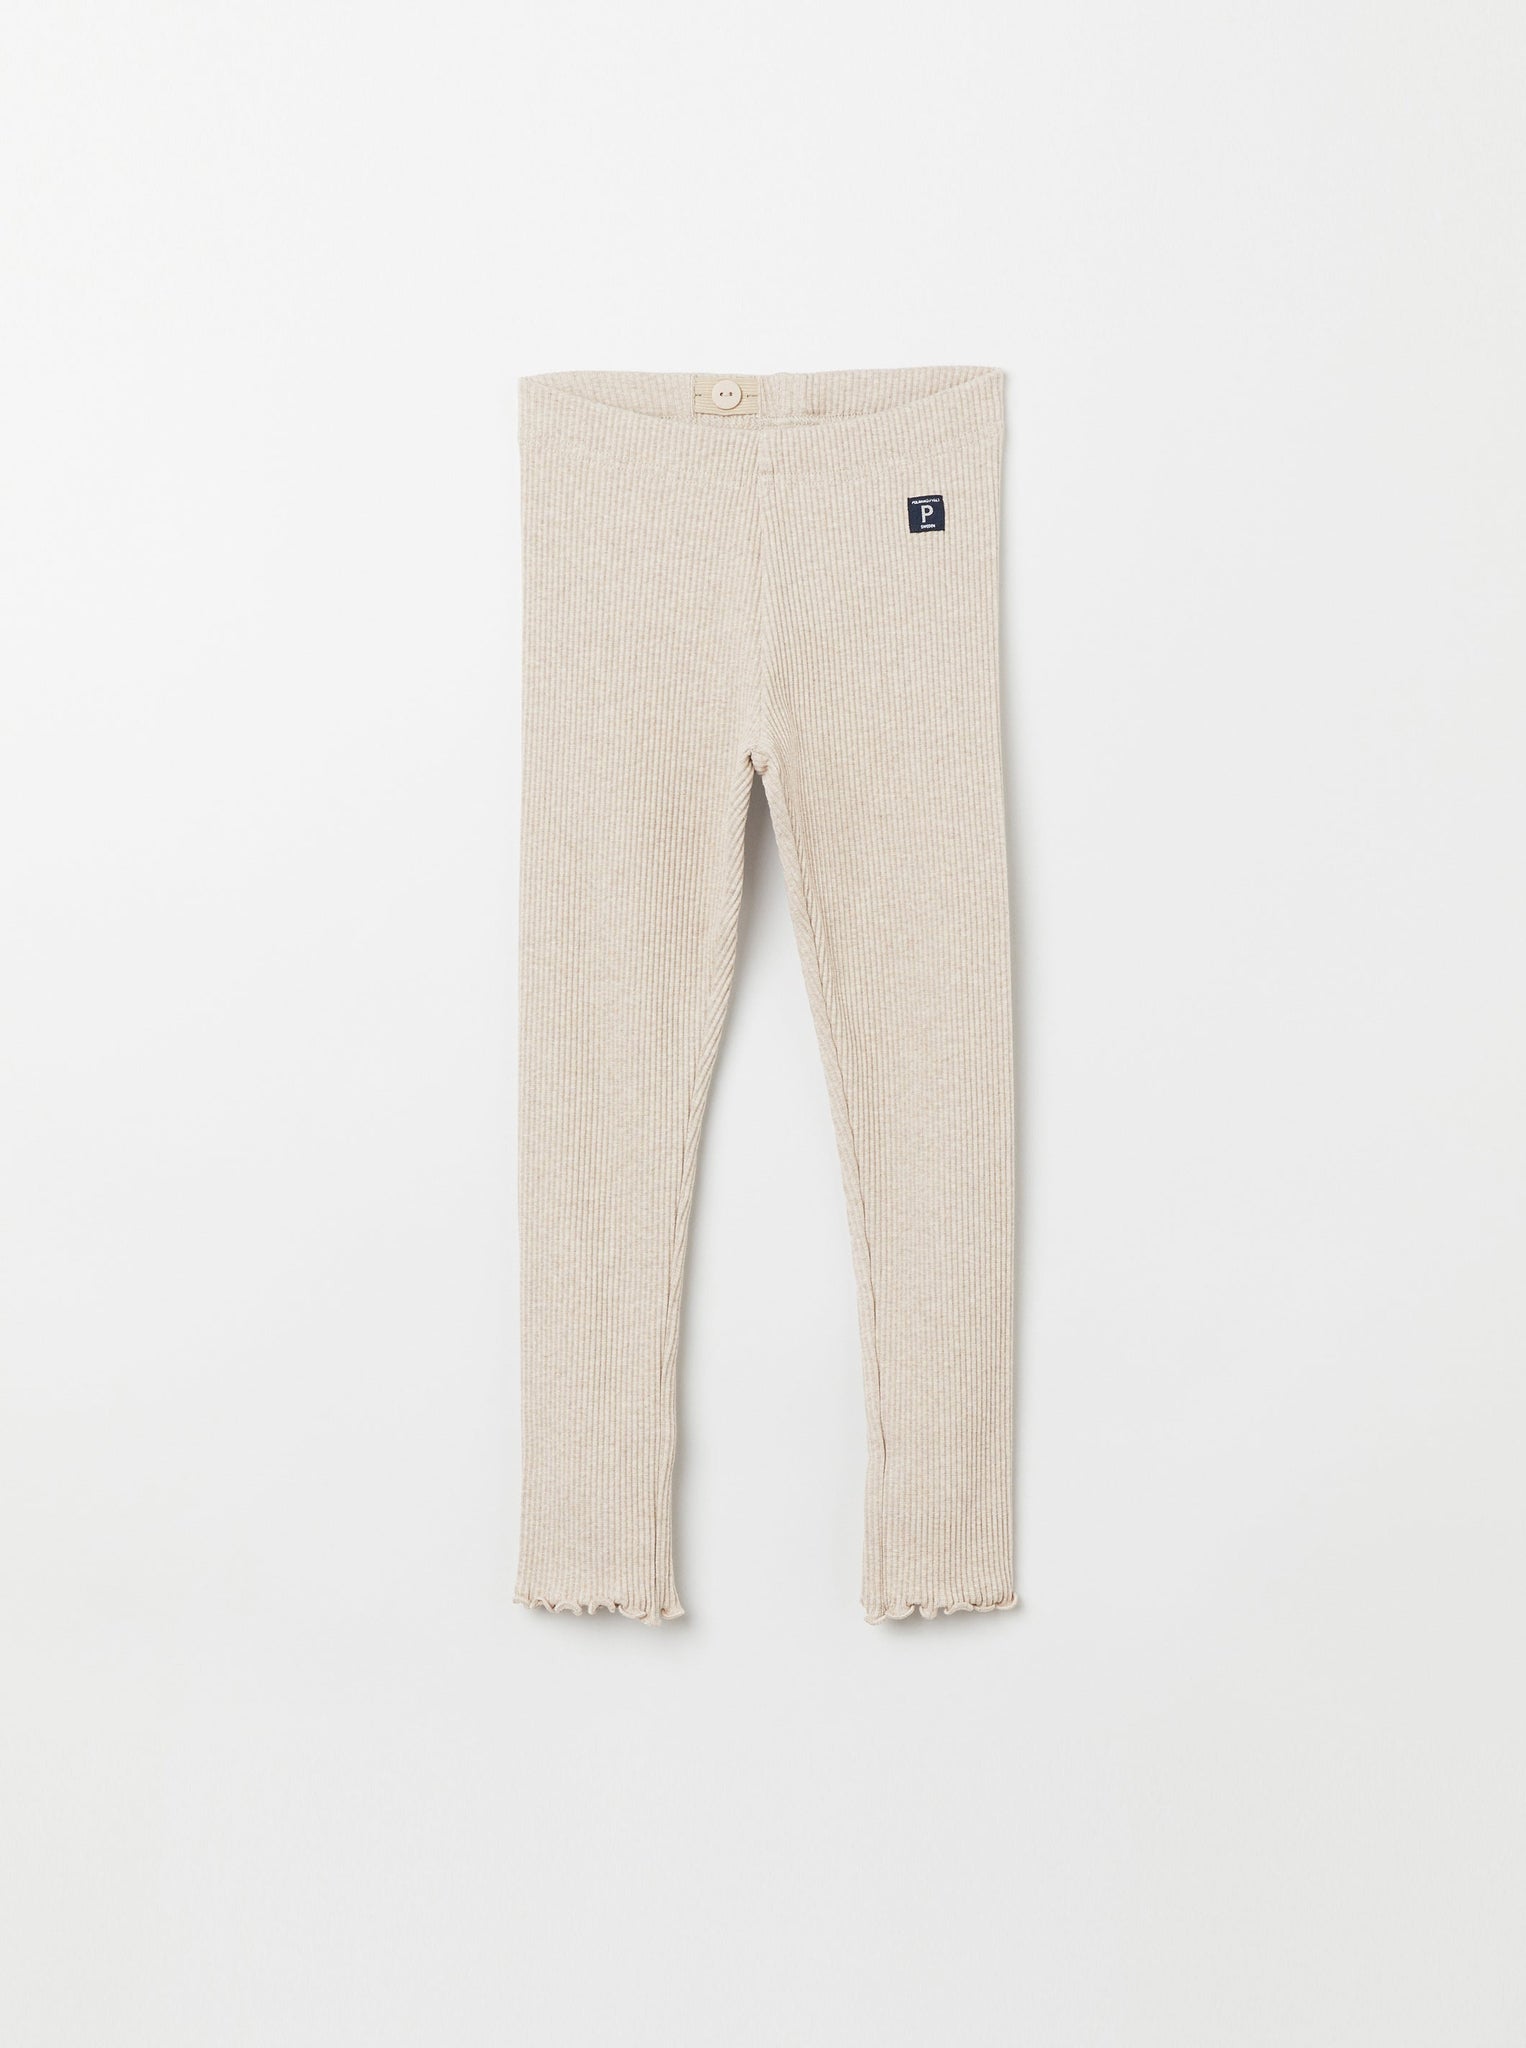 Beige Ribbed Kids Leggings from the Polarn O. Pyret Kidswear collection. Ethically produced kids clothing.